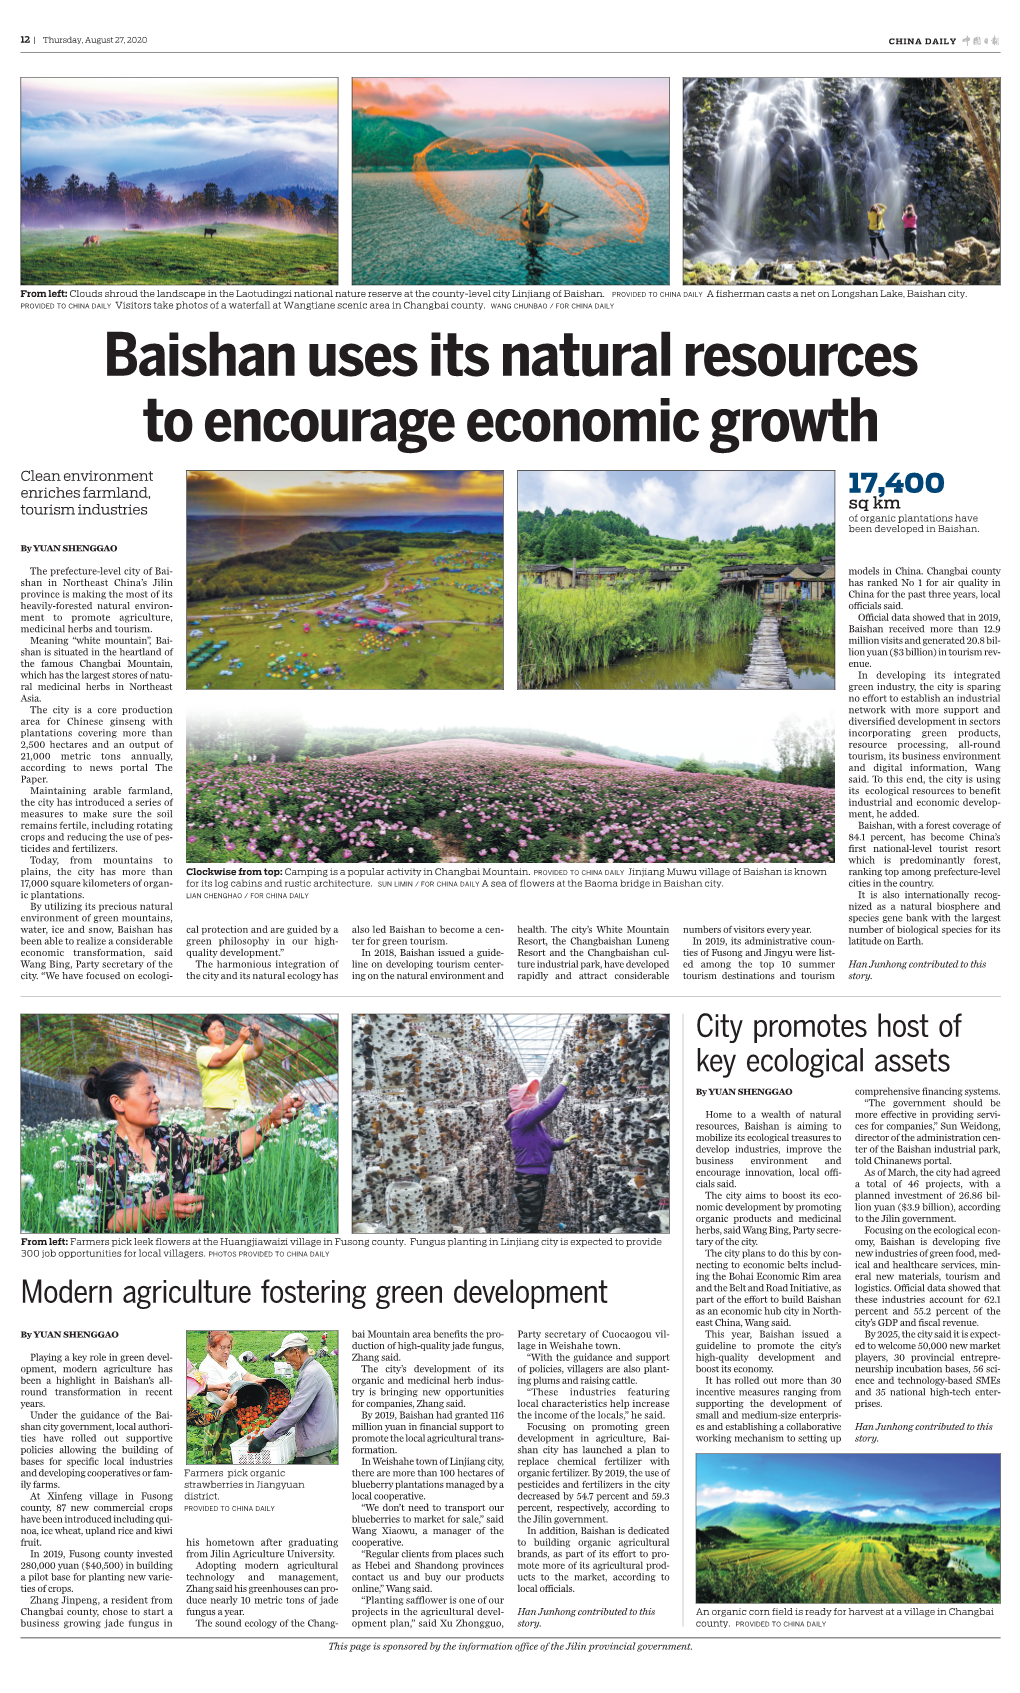 Baishan Uses Its Natural Resources to Encourage Economic Growth